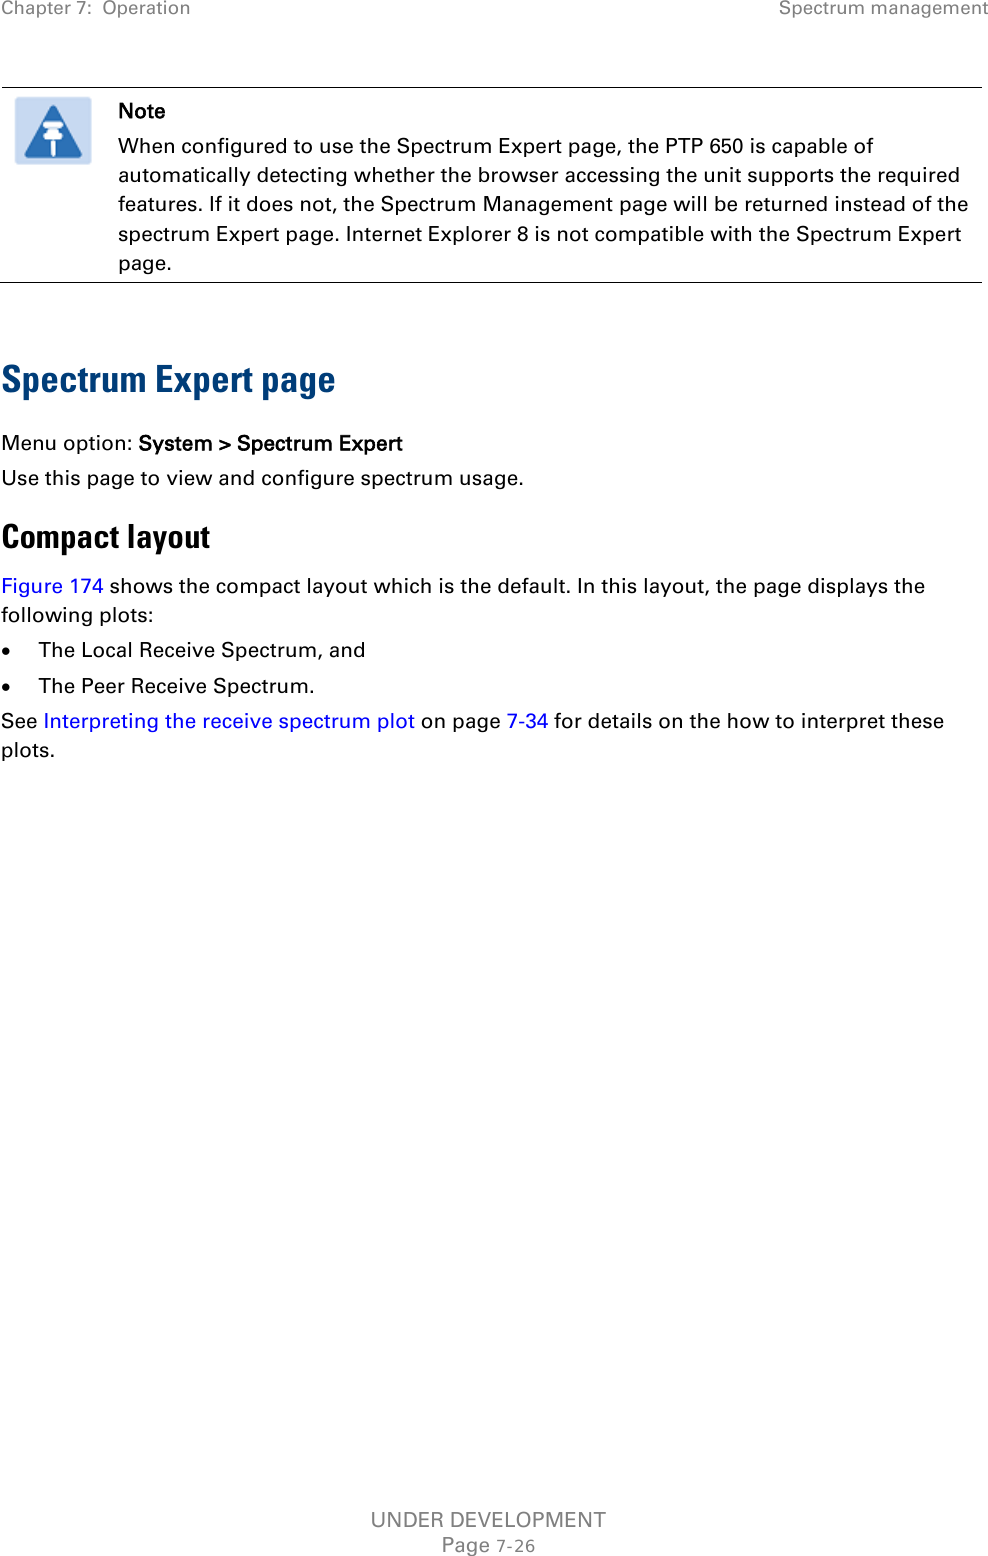 Chapter 7:  Operation Spectrum management   Note When configured to use the Spectrum Expert page, the PTP 650 is capable of automatically detecting whether the browser accessing the unit supports the required features. If it does not, the Spectrum Management page will be returned instead of the spectrum Expert page. Internet Explorer 8 is not compatible with the Spectrum Expert page.  Spectrum Expert page Menu option: System &gt; Spectrum Expert Use this page to view and configure spectrum usage. Compact layout Figure 174 shows the compact layout which is the default. In this layout, the page displays the following plots: • The Local Receive Spectrum, and • The Peer Receive Spectrum. See Interpreting the receive spectrum plot on page 7-34 for details on the how to interpret these plots. UNDER DEVELOPMENT Page 7-26 